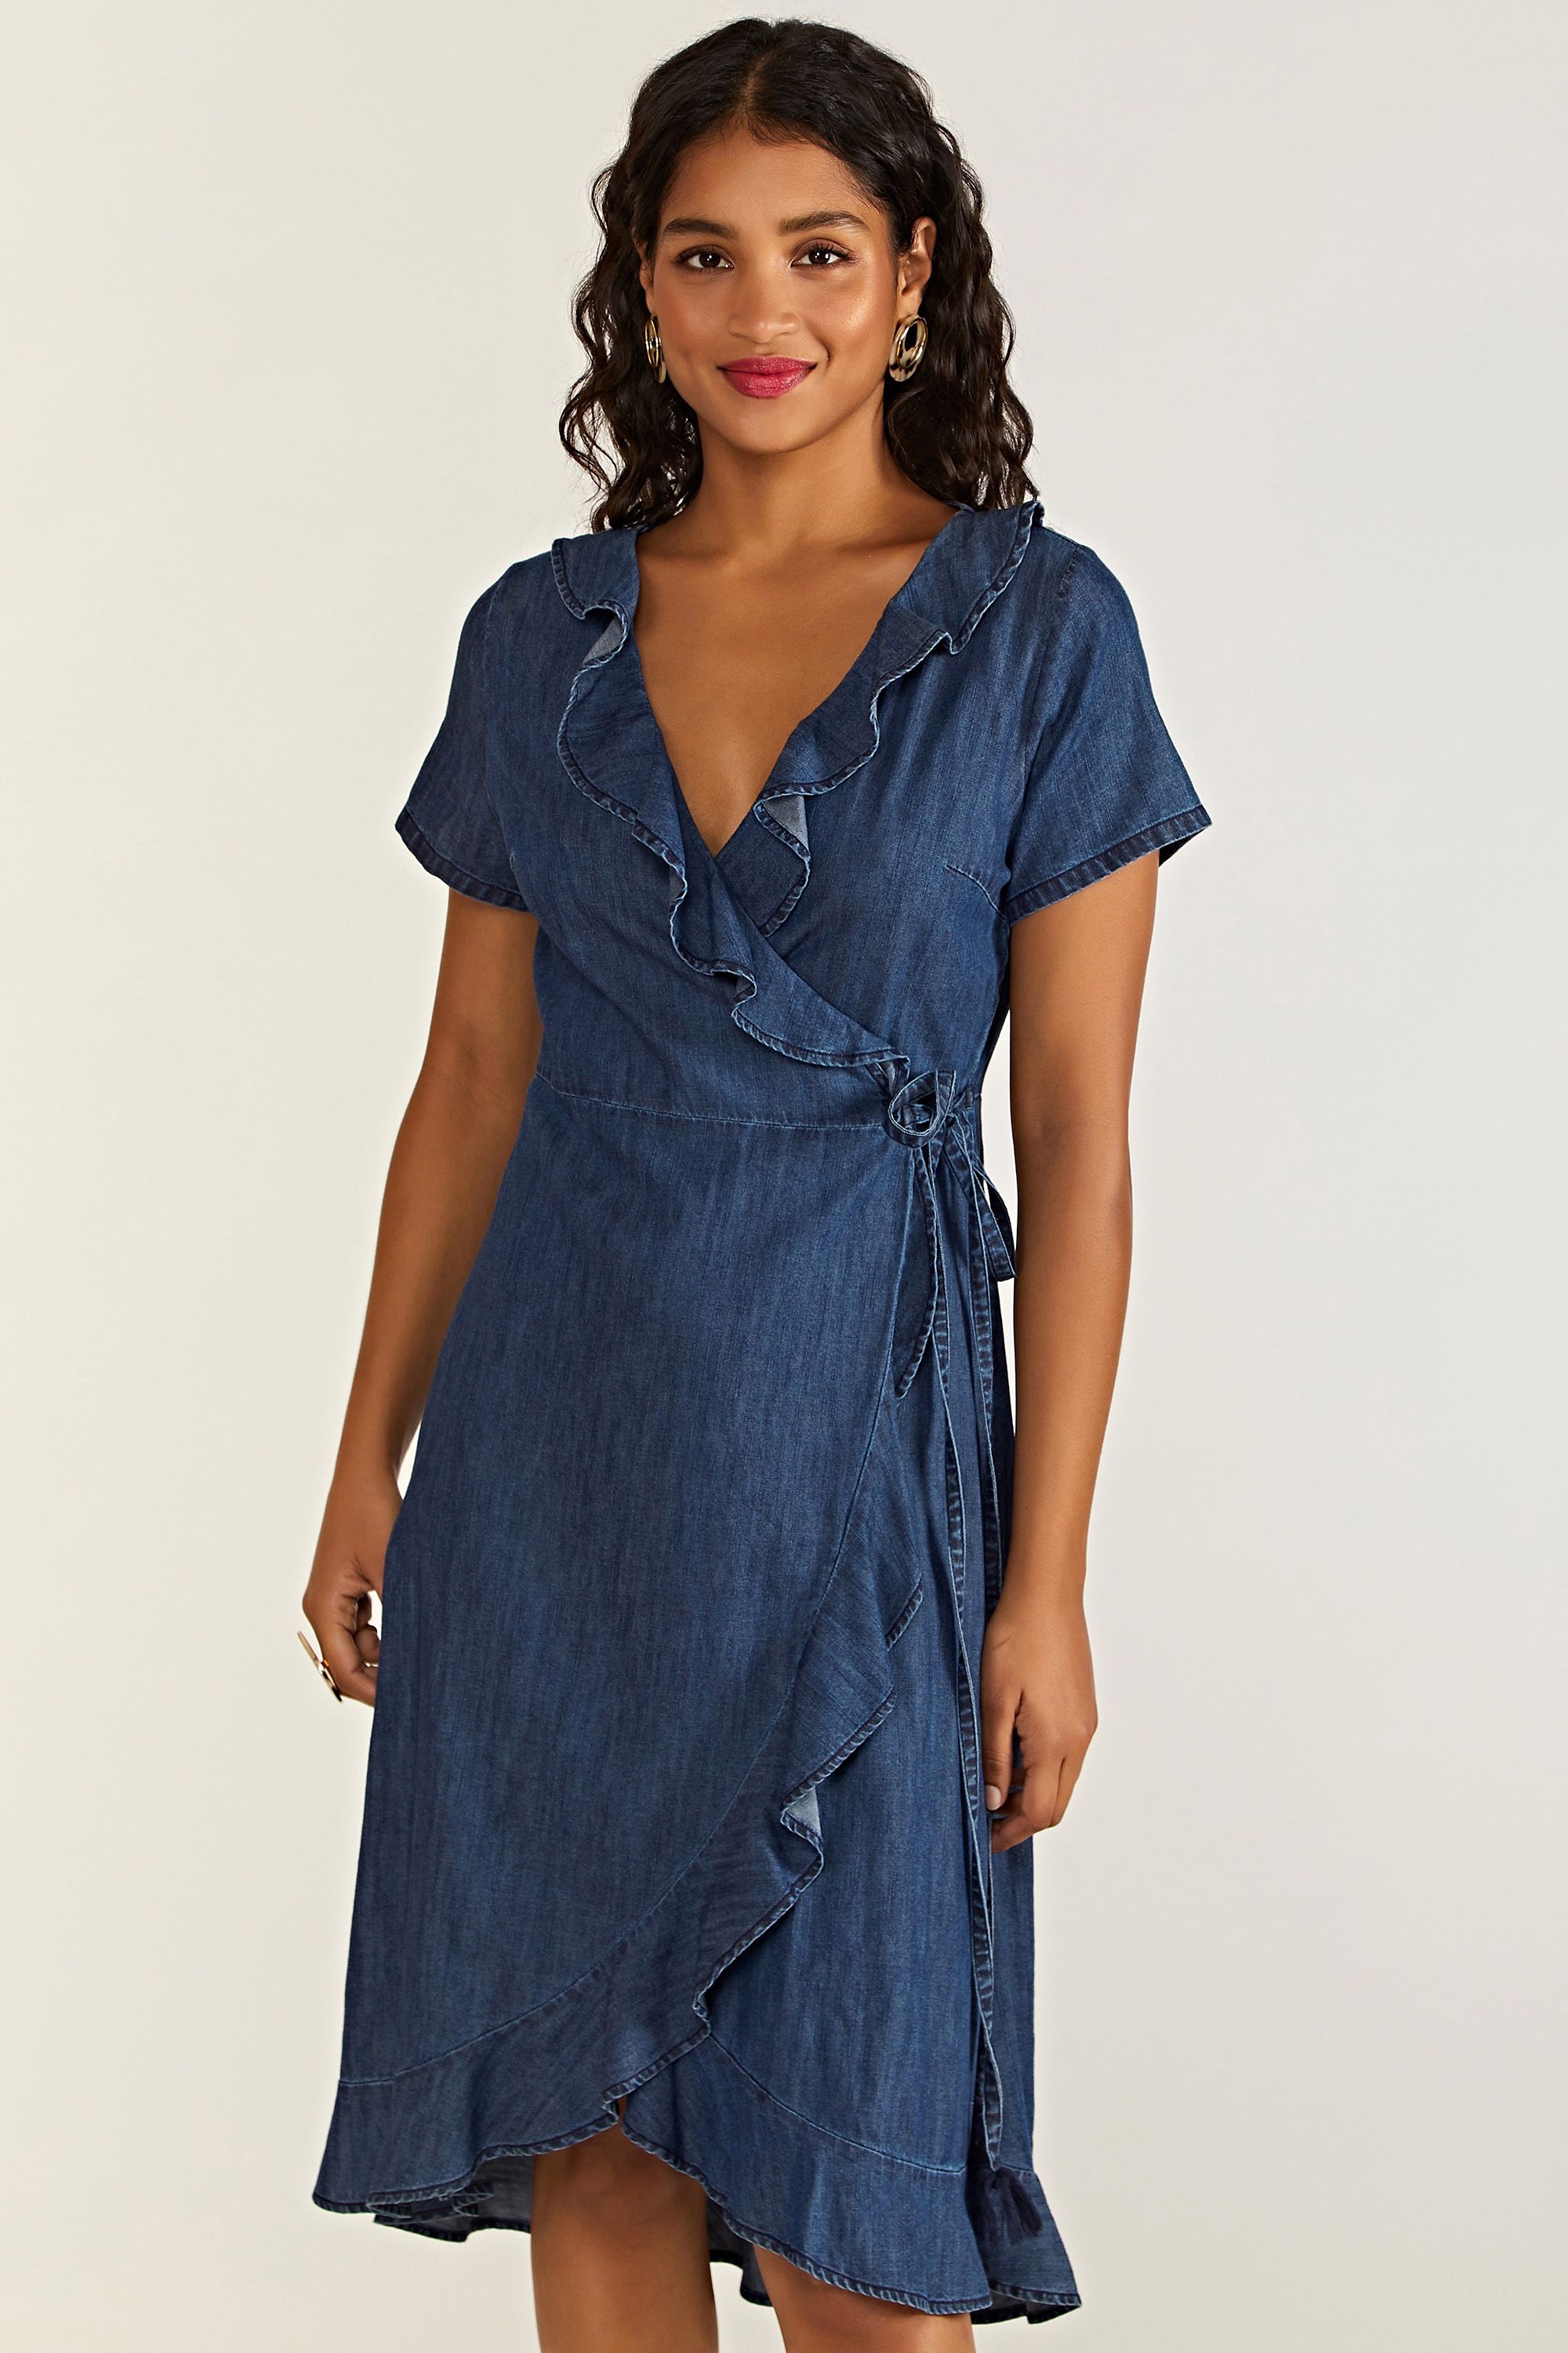 A staple of every wardrobe, this Denim Wrap Dress gives you an effortless choice between smart and casual. Cut in an elegant wrap shape that's super stylish, it's been enhanced with dainty ruffles and a self-tie waist. The cotton chambray gives it a lightweight feel, with a little stretch woven into the fabric for extra movement. Consider trainers and a rucksack for weekend adventures.100% Cotton. Machine Wash At 30. Length is 112cm/40inches